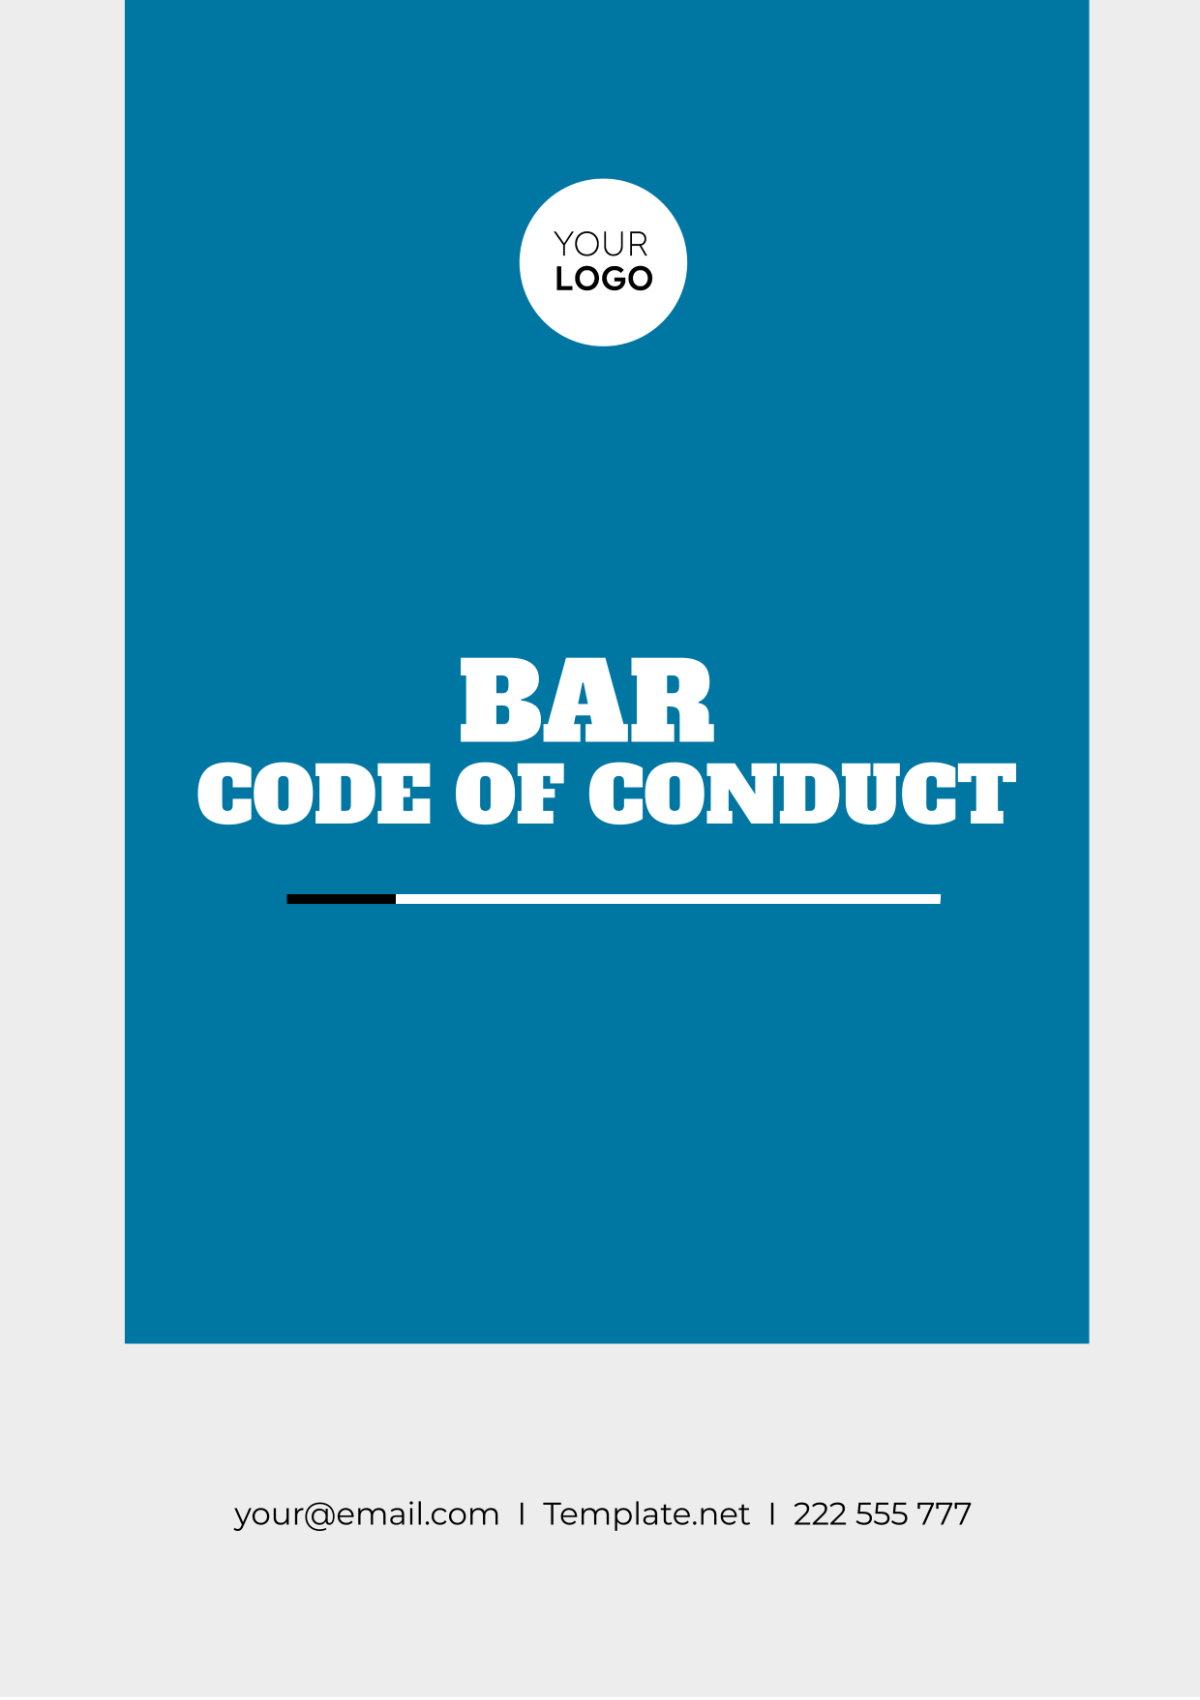 Bar Code of Conduct Template